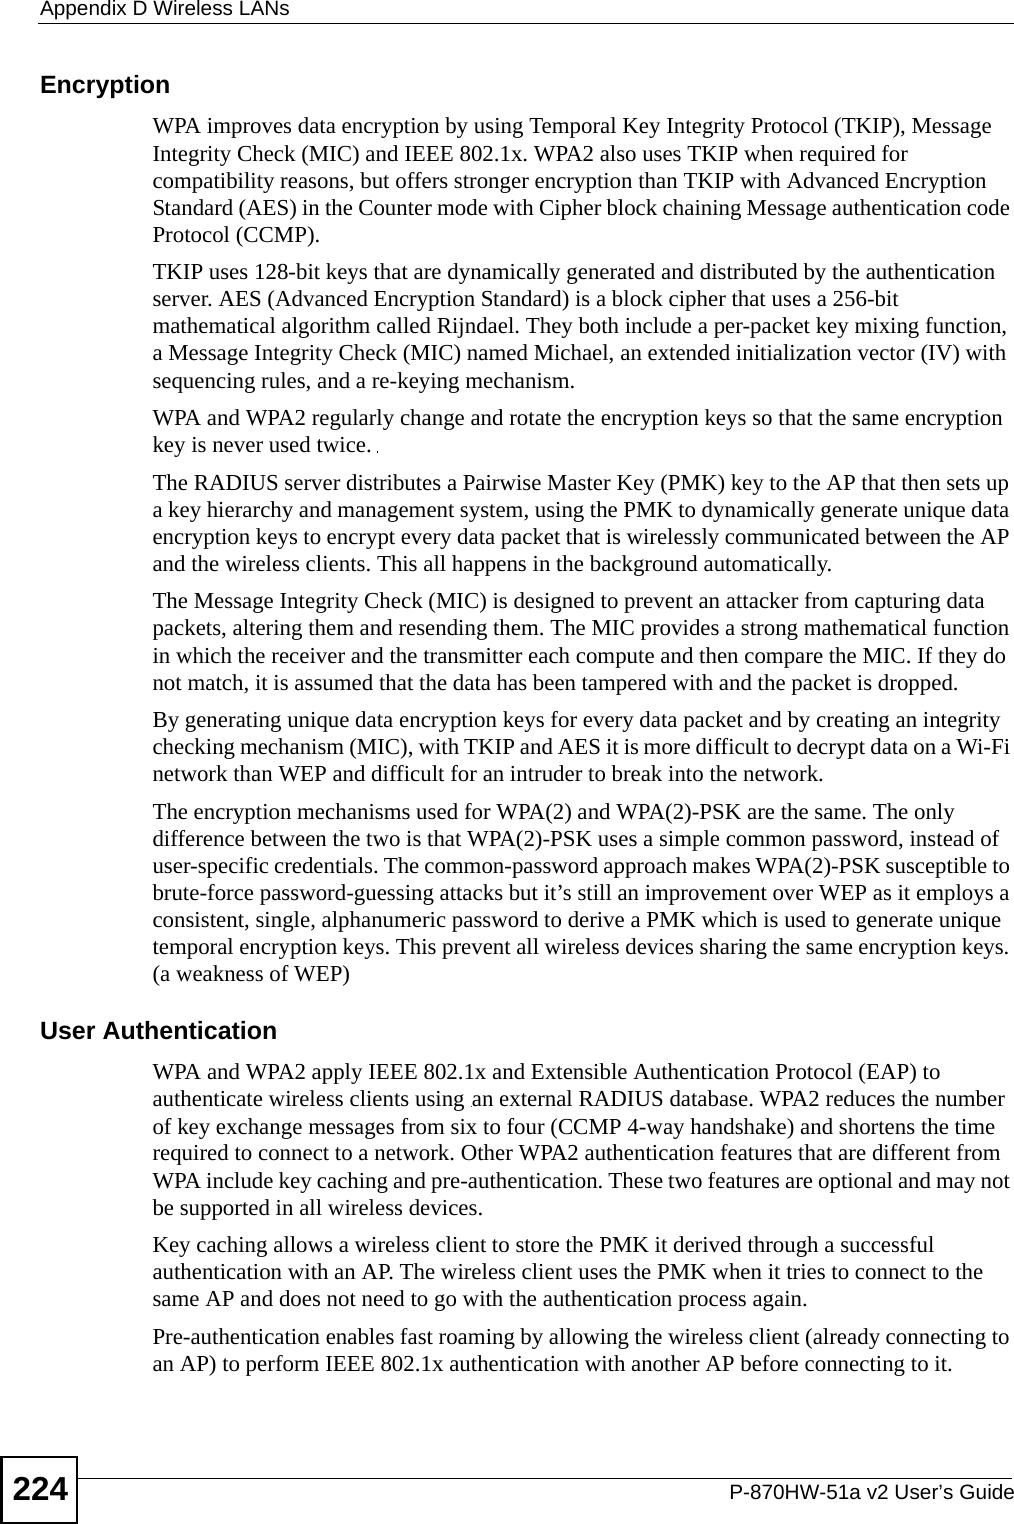 Appendix D Wireless LANsP-870HW-51a v2 User’s Guide224Encryption WPA improves data encryption by using Temporal Key Integrity Protocol (TKIP), Message Integrity Check (MIC) and IEEE 802.1x. WPA2 also uses TKIP when required for compatibility reasons, but offers stronger encryption than TKIP with Advanced Encryption Standard (AES) in the Counter mode with Cipher block chaining Message authentication code Protocol (CCMP).TKIP uses 128-bit keys that are dynamically generated and distributed by the authentication server. AES (Advanced Encryption Standard) is a block cipher that uses a 256-bit mathematical algorithm called Rijndael. They both include a per-packet key mixing function, a Message Integrity Check (MIC) named Michael, an extended initialization vector (IV) with sequencing rules, and a re-keying mechanism.WPA and WPA2 regularly change and rotate the encryption keys so that the same encryption key is never used twice. The RADIUS server distributes a Pairwise Master Key (PMK) key to the AP that then sets up a key hierarchy and management system, using the PMK to dynamically generate unique data encryption keys to encrypt every data packet that is wirelessly communicated between the AP and the wireless clients. This all happens in the background automatically.The Message Integrity Check (MIC) is designed to prevent an attacker from capturing data packets, altering them and resending them. The MIC provides a strong mathematical function in which the receiver and the transmitter each compute and then compare the MIC. If they do not match, it is assumed that the data has been tampered with and the packet is dropped. By generating unique data encryption keys for every data packet and by creating an integrity checking mechanism (MIC), with TKIP and AES it is more difficult to decrypt data on a Wi-Fi network than WEP and difficult for an intruder to break into the network. The encryption mechanisms used for WPA(2) and WPA(2)-PSK are the same. The only difference between the two is that WPA(2)-PSK uses a simple common password, instead of user-specific credentials. The common-password approach makes WPA(2)-PSK susceptible to brute-force password-guessing attacks but it’s still an improvement over WEP as it employs a consistent, single, alphanumeric password to derive a PMK which is used to generate unique temporal encryption keys. This prevent all wireless devices sharing the same encryption keys. (a weakness of WEP)User Authentication WPA and WPA2 apply IEEE 802.1x and Extensible Authentication Protocol (EAP) to authenticate wireless clients using an external RADIUS database. WPA2 reduces the number of key exchange messages from six to four (CCMP 4-way handshake) and shortens the time required to connect to a network. Other WPA2 authentication features that are different from WPA include key caching and pre-authentication. These two features are optional and may not be supported in all wireless devices.Key caching allows a wireless client to store the PMK it derived through a successful authentication with an AP. The wireless client uses the PMK when it tries to connect to the same AP and does not need to go with the authentication process again.Pre-authentication enables fast roaming by allowing the wireless client (already connecting to an AP) to perform IEEE 802.1x authentication with another AP before connecting to it.